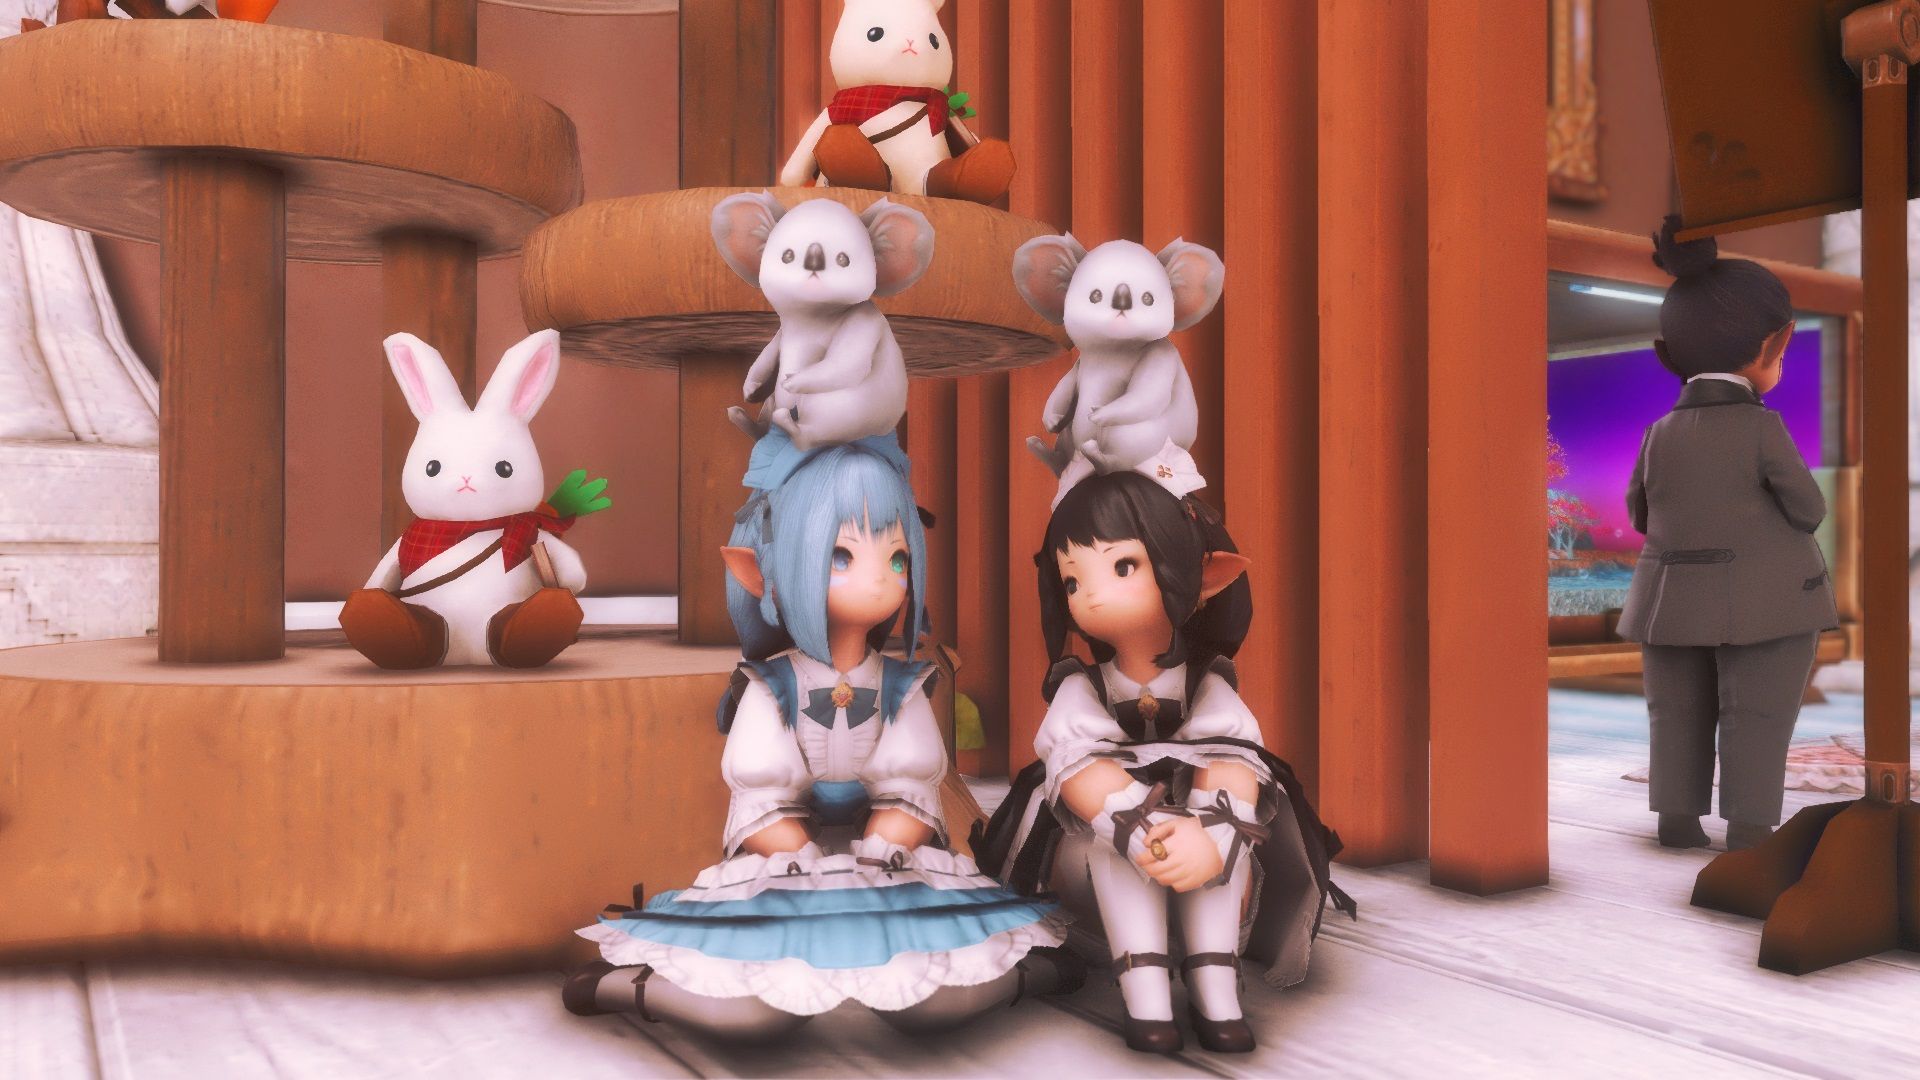 Final Fantasy 14 maids in the Maid Service cafe